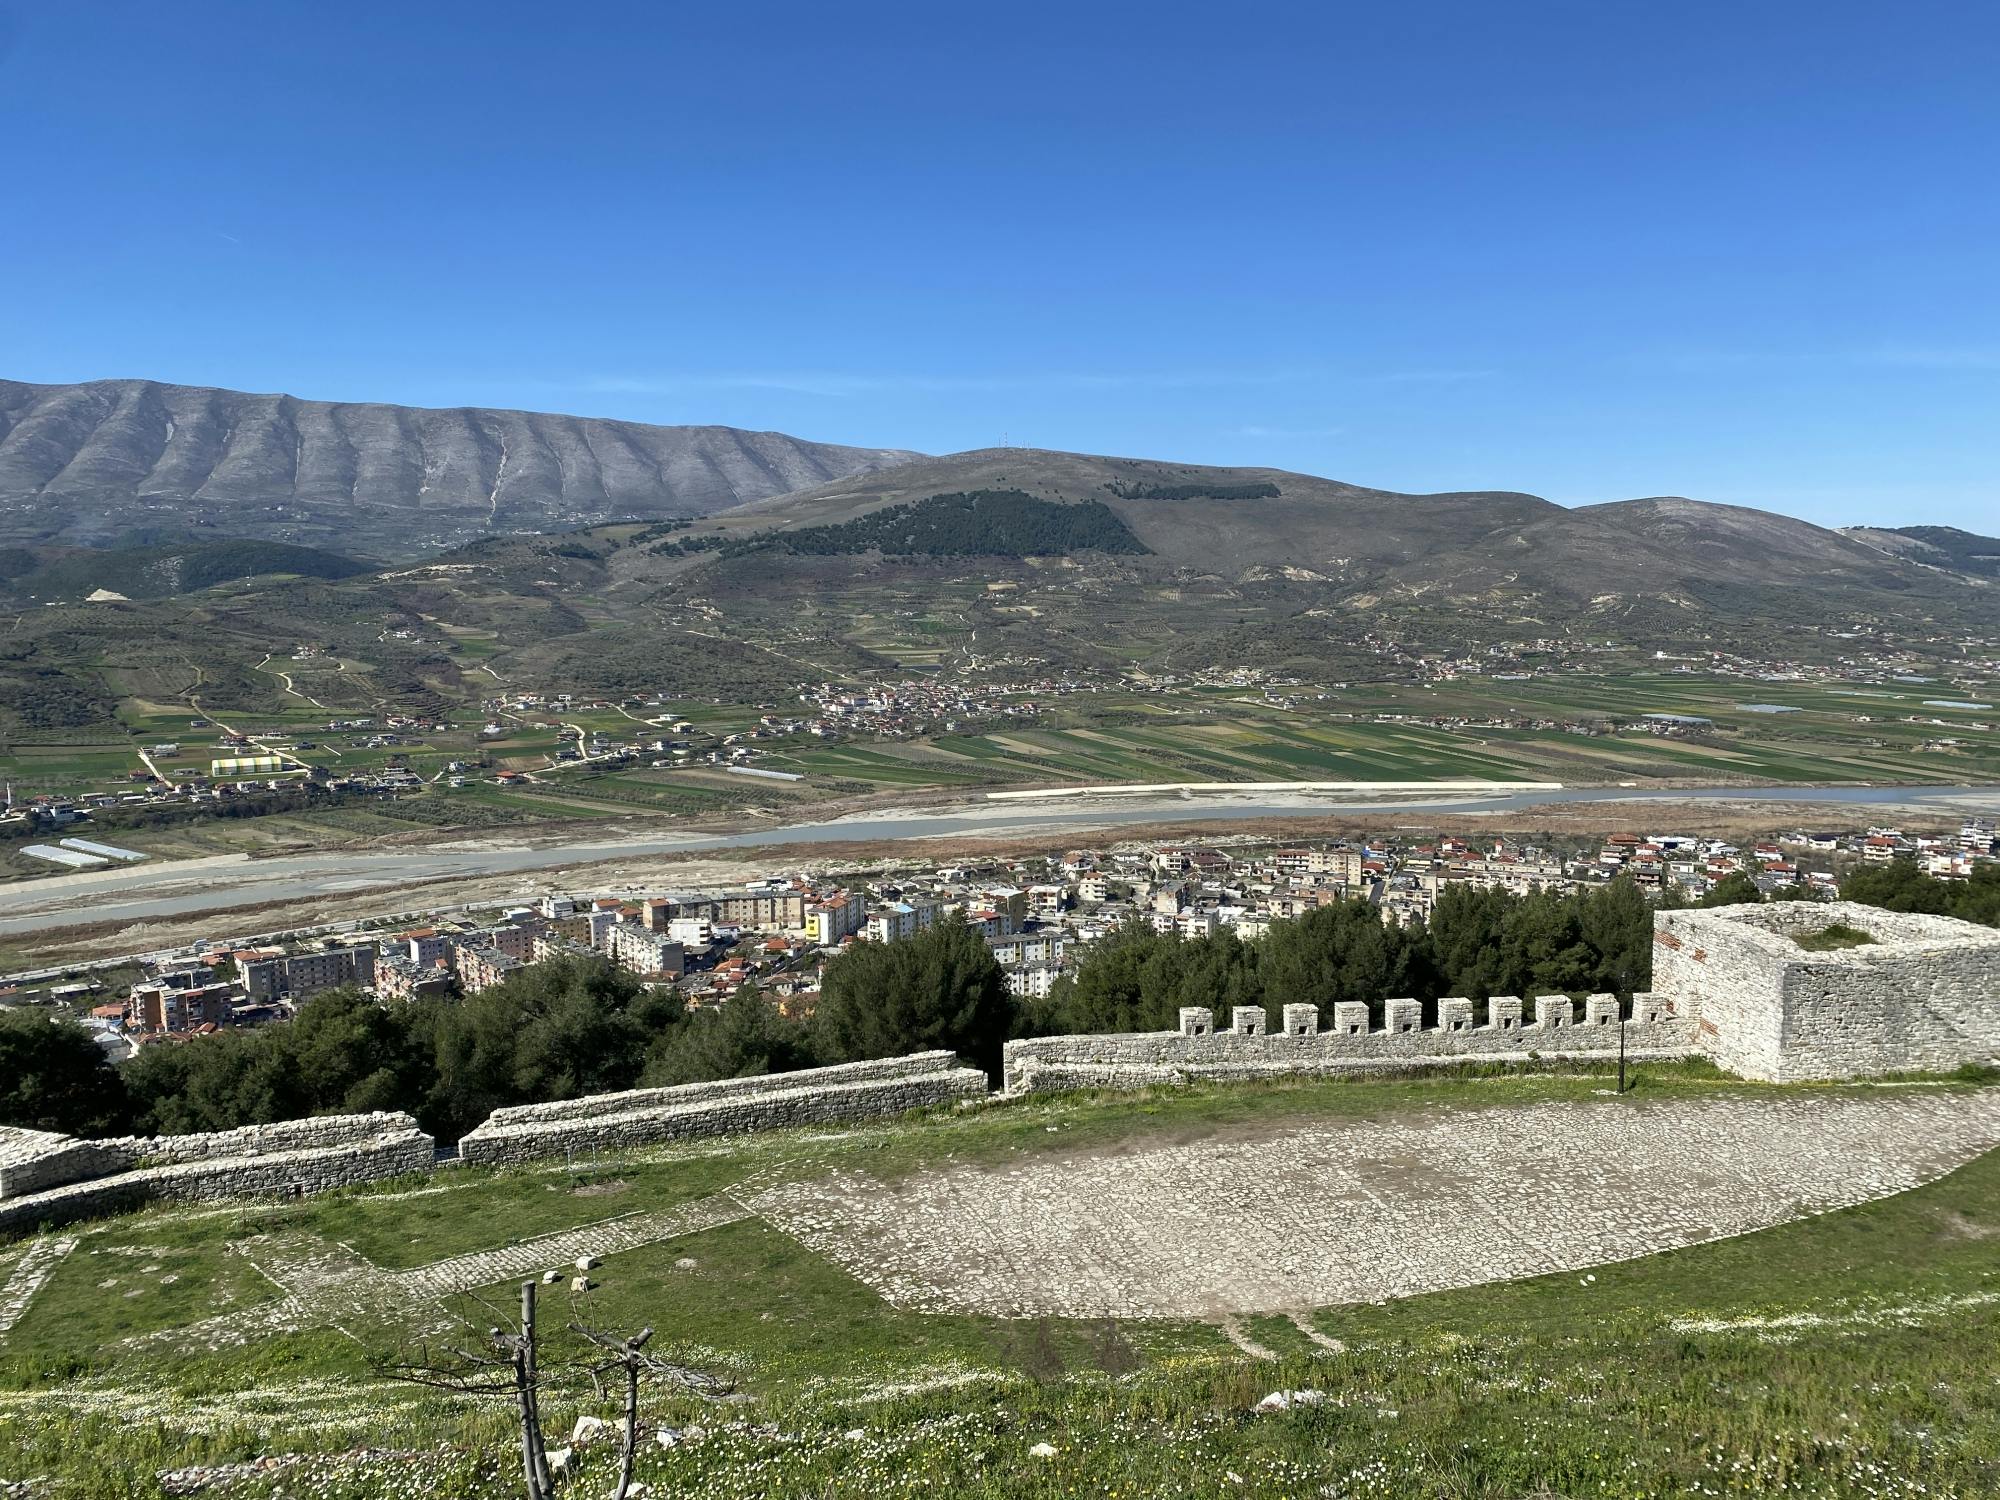 Guided tour of the old city of Berat